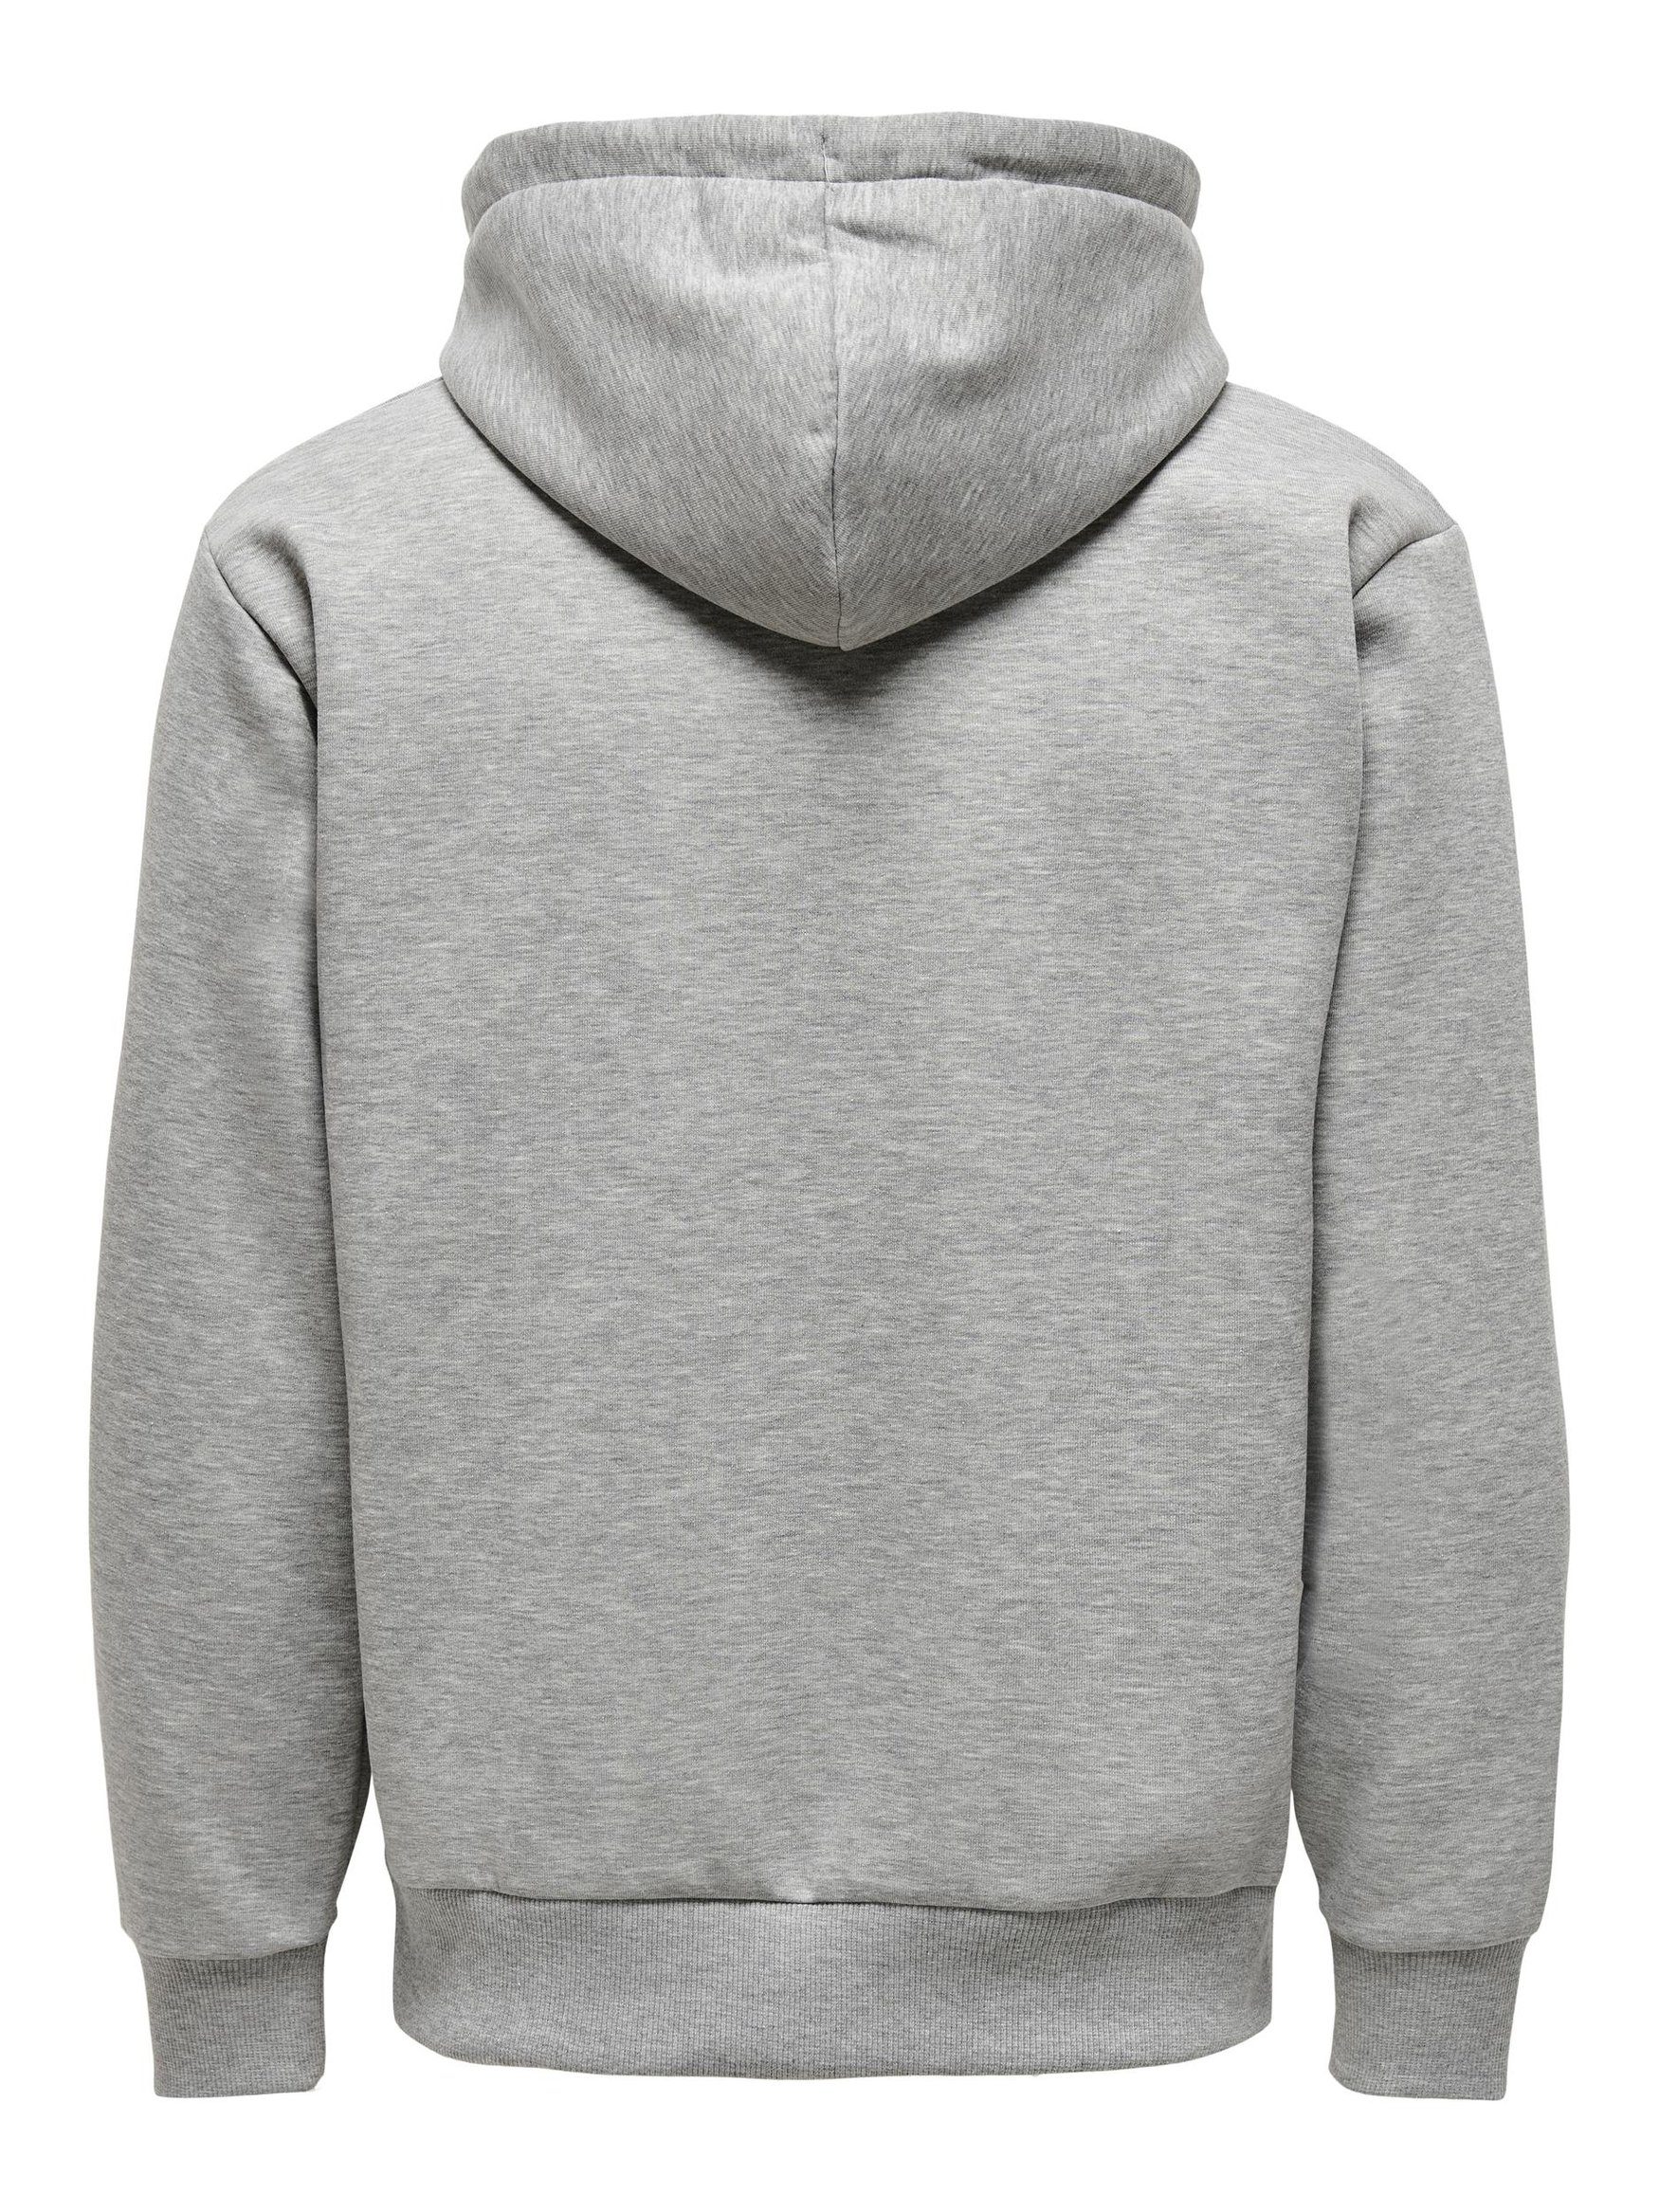 ONLY Hoodie Grau-2 in 5425 & Kapuzen SONS Pullover Basic Hoodie Weicher ONSCERES